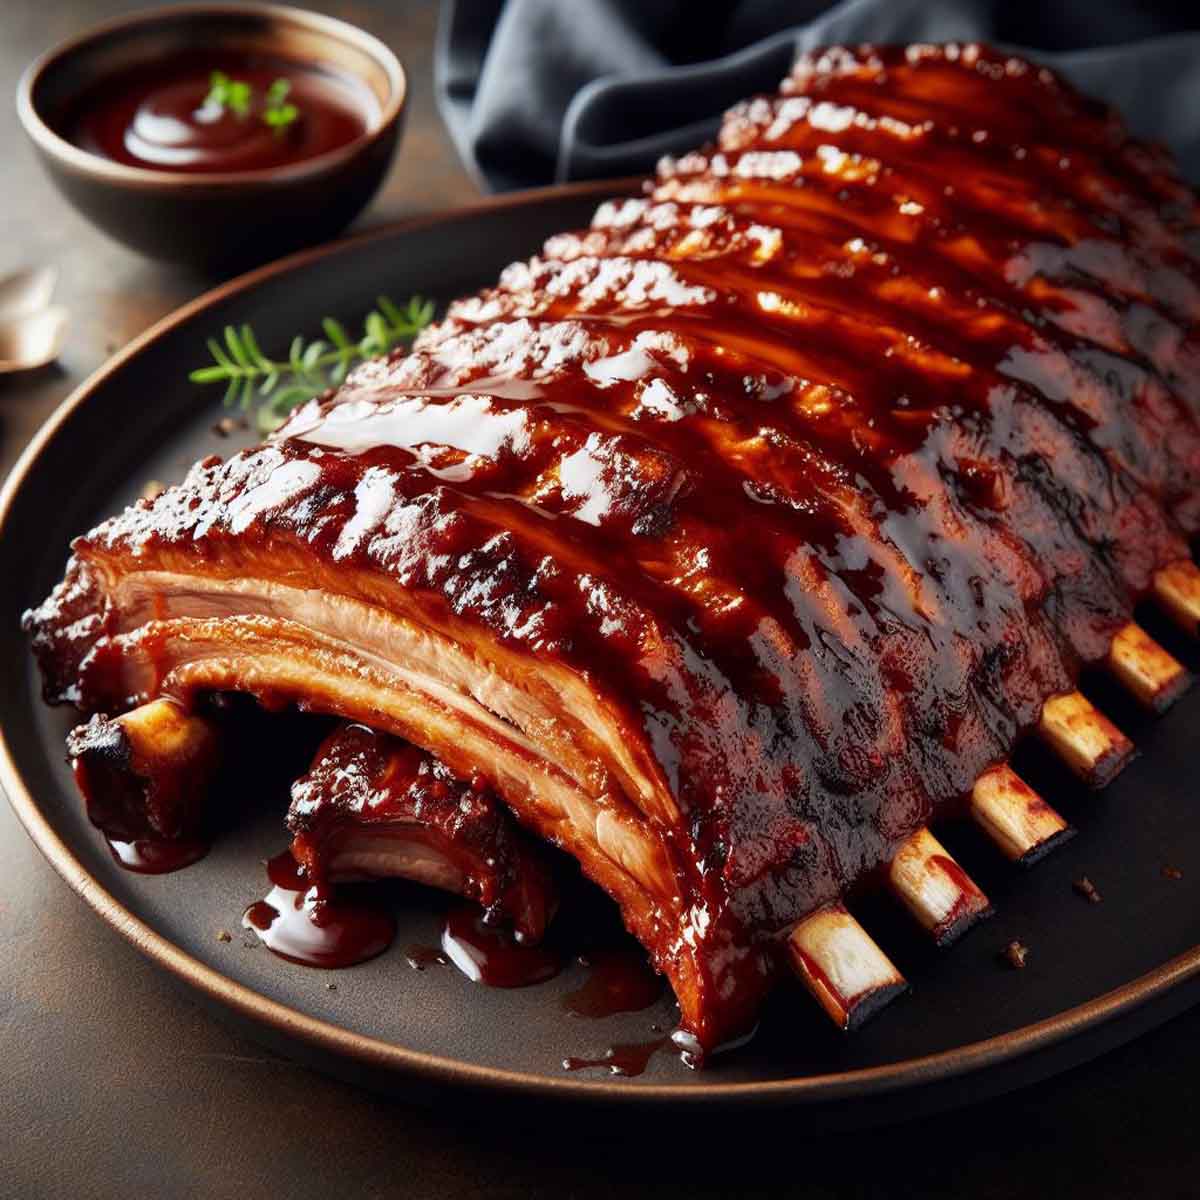 Grilled ribs served on a dinner plate, beautifully charred with grill marks and a shiny barbecue sauce glaze.